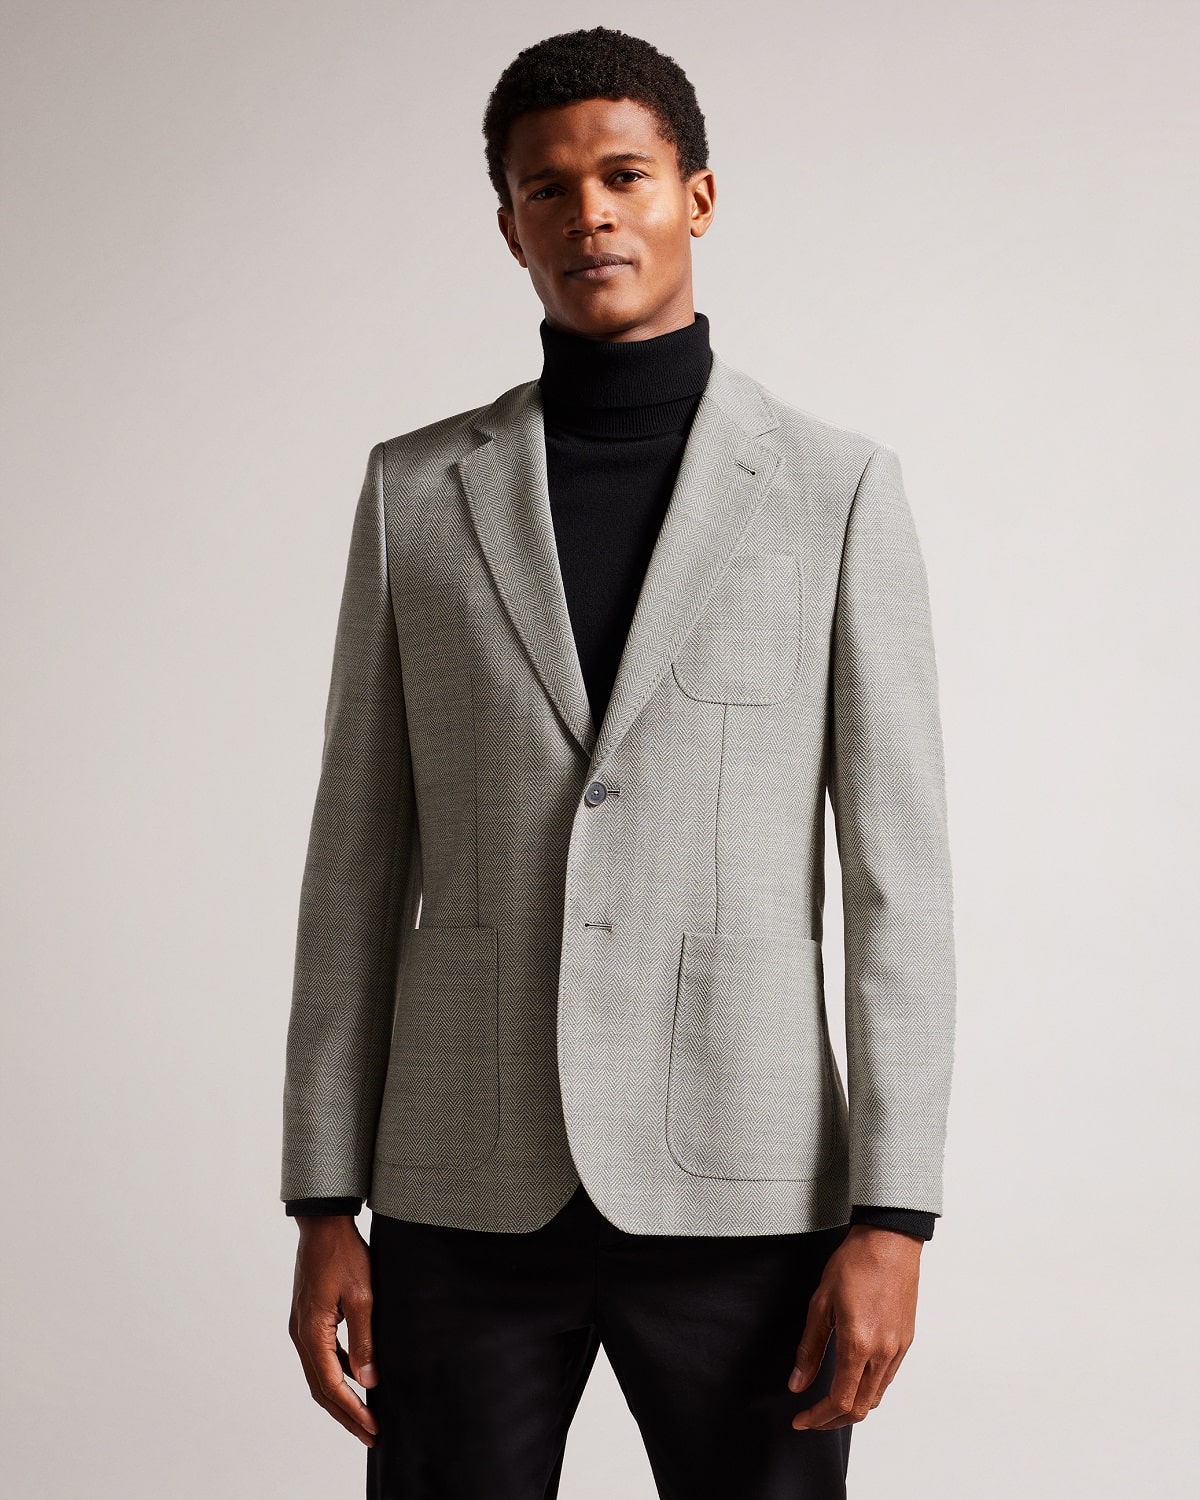 How Should a Blazer Fit